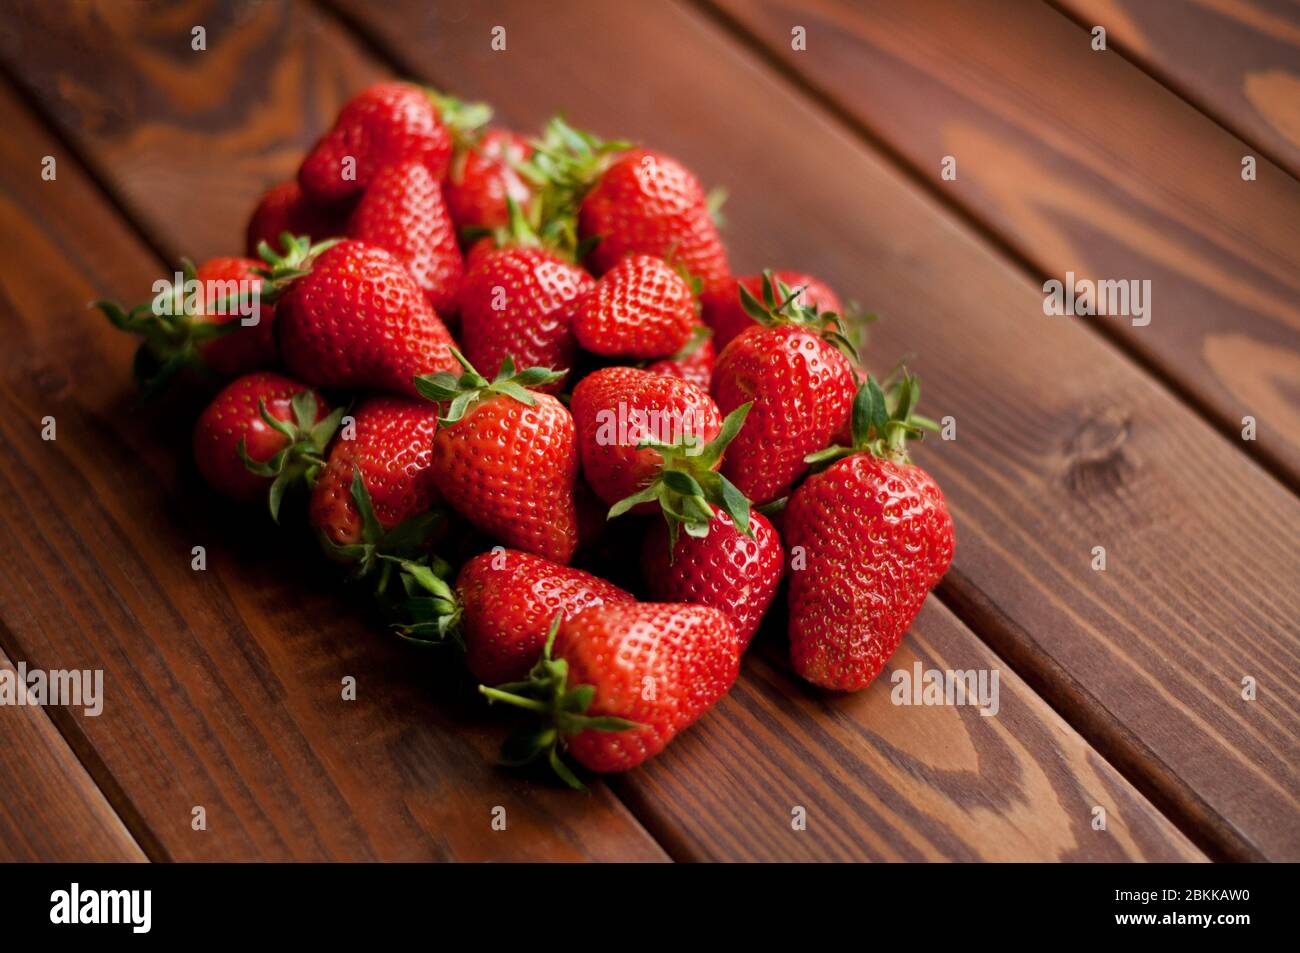 Ripe strawberries in craft paper on a wooden background. Healthy fresh food. Top view Stock Photo